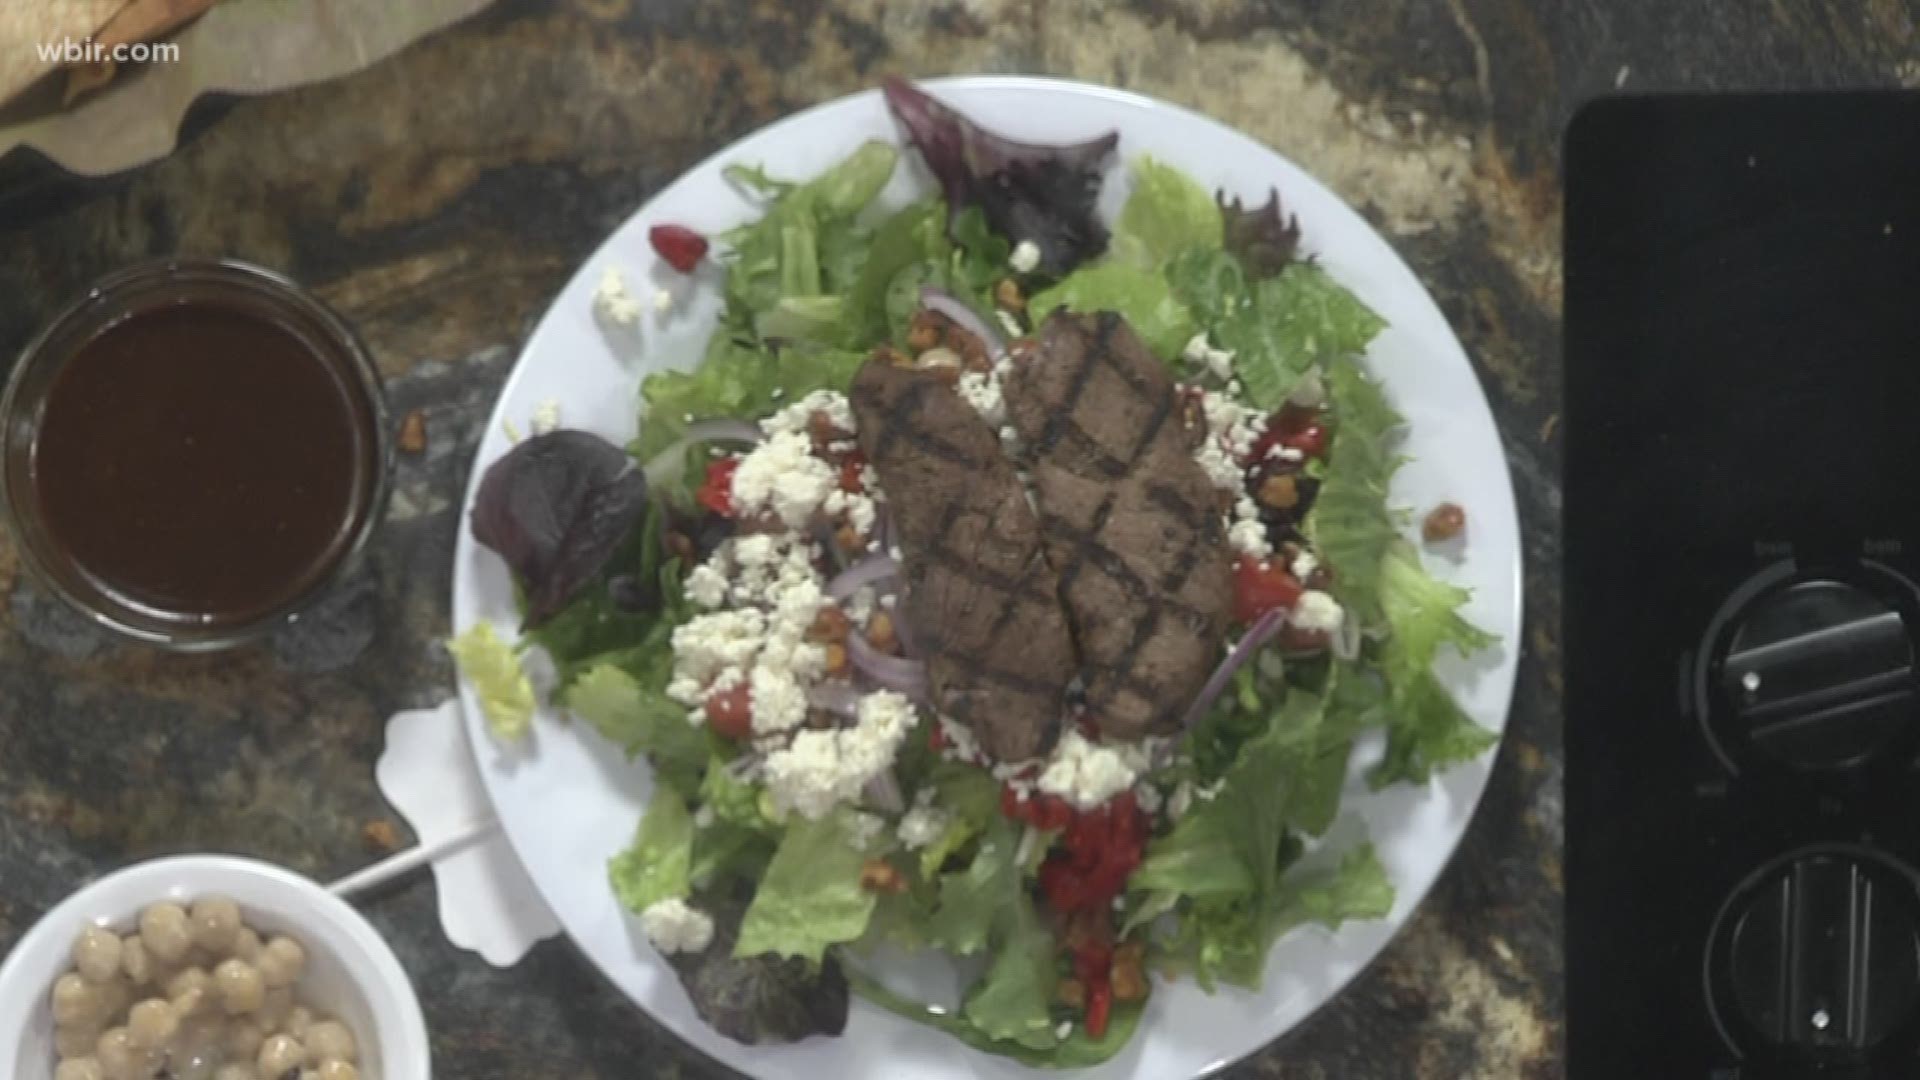 Trevor with Taziki's Mediterranean Cafe in Knoxville makes a healthy salad. Jan 17, 2019-4pm